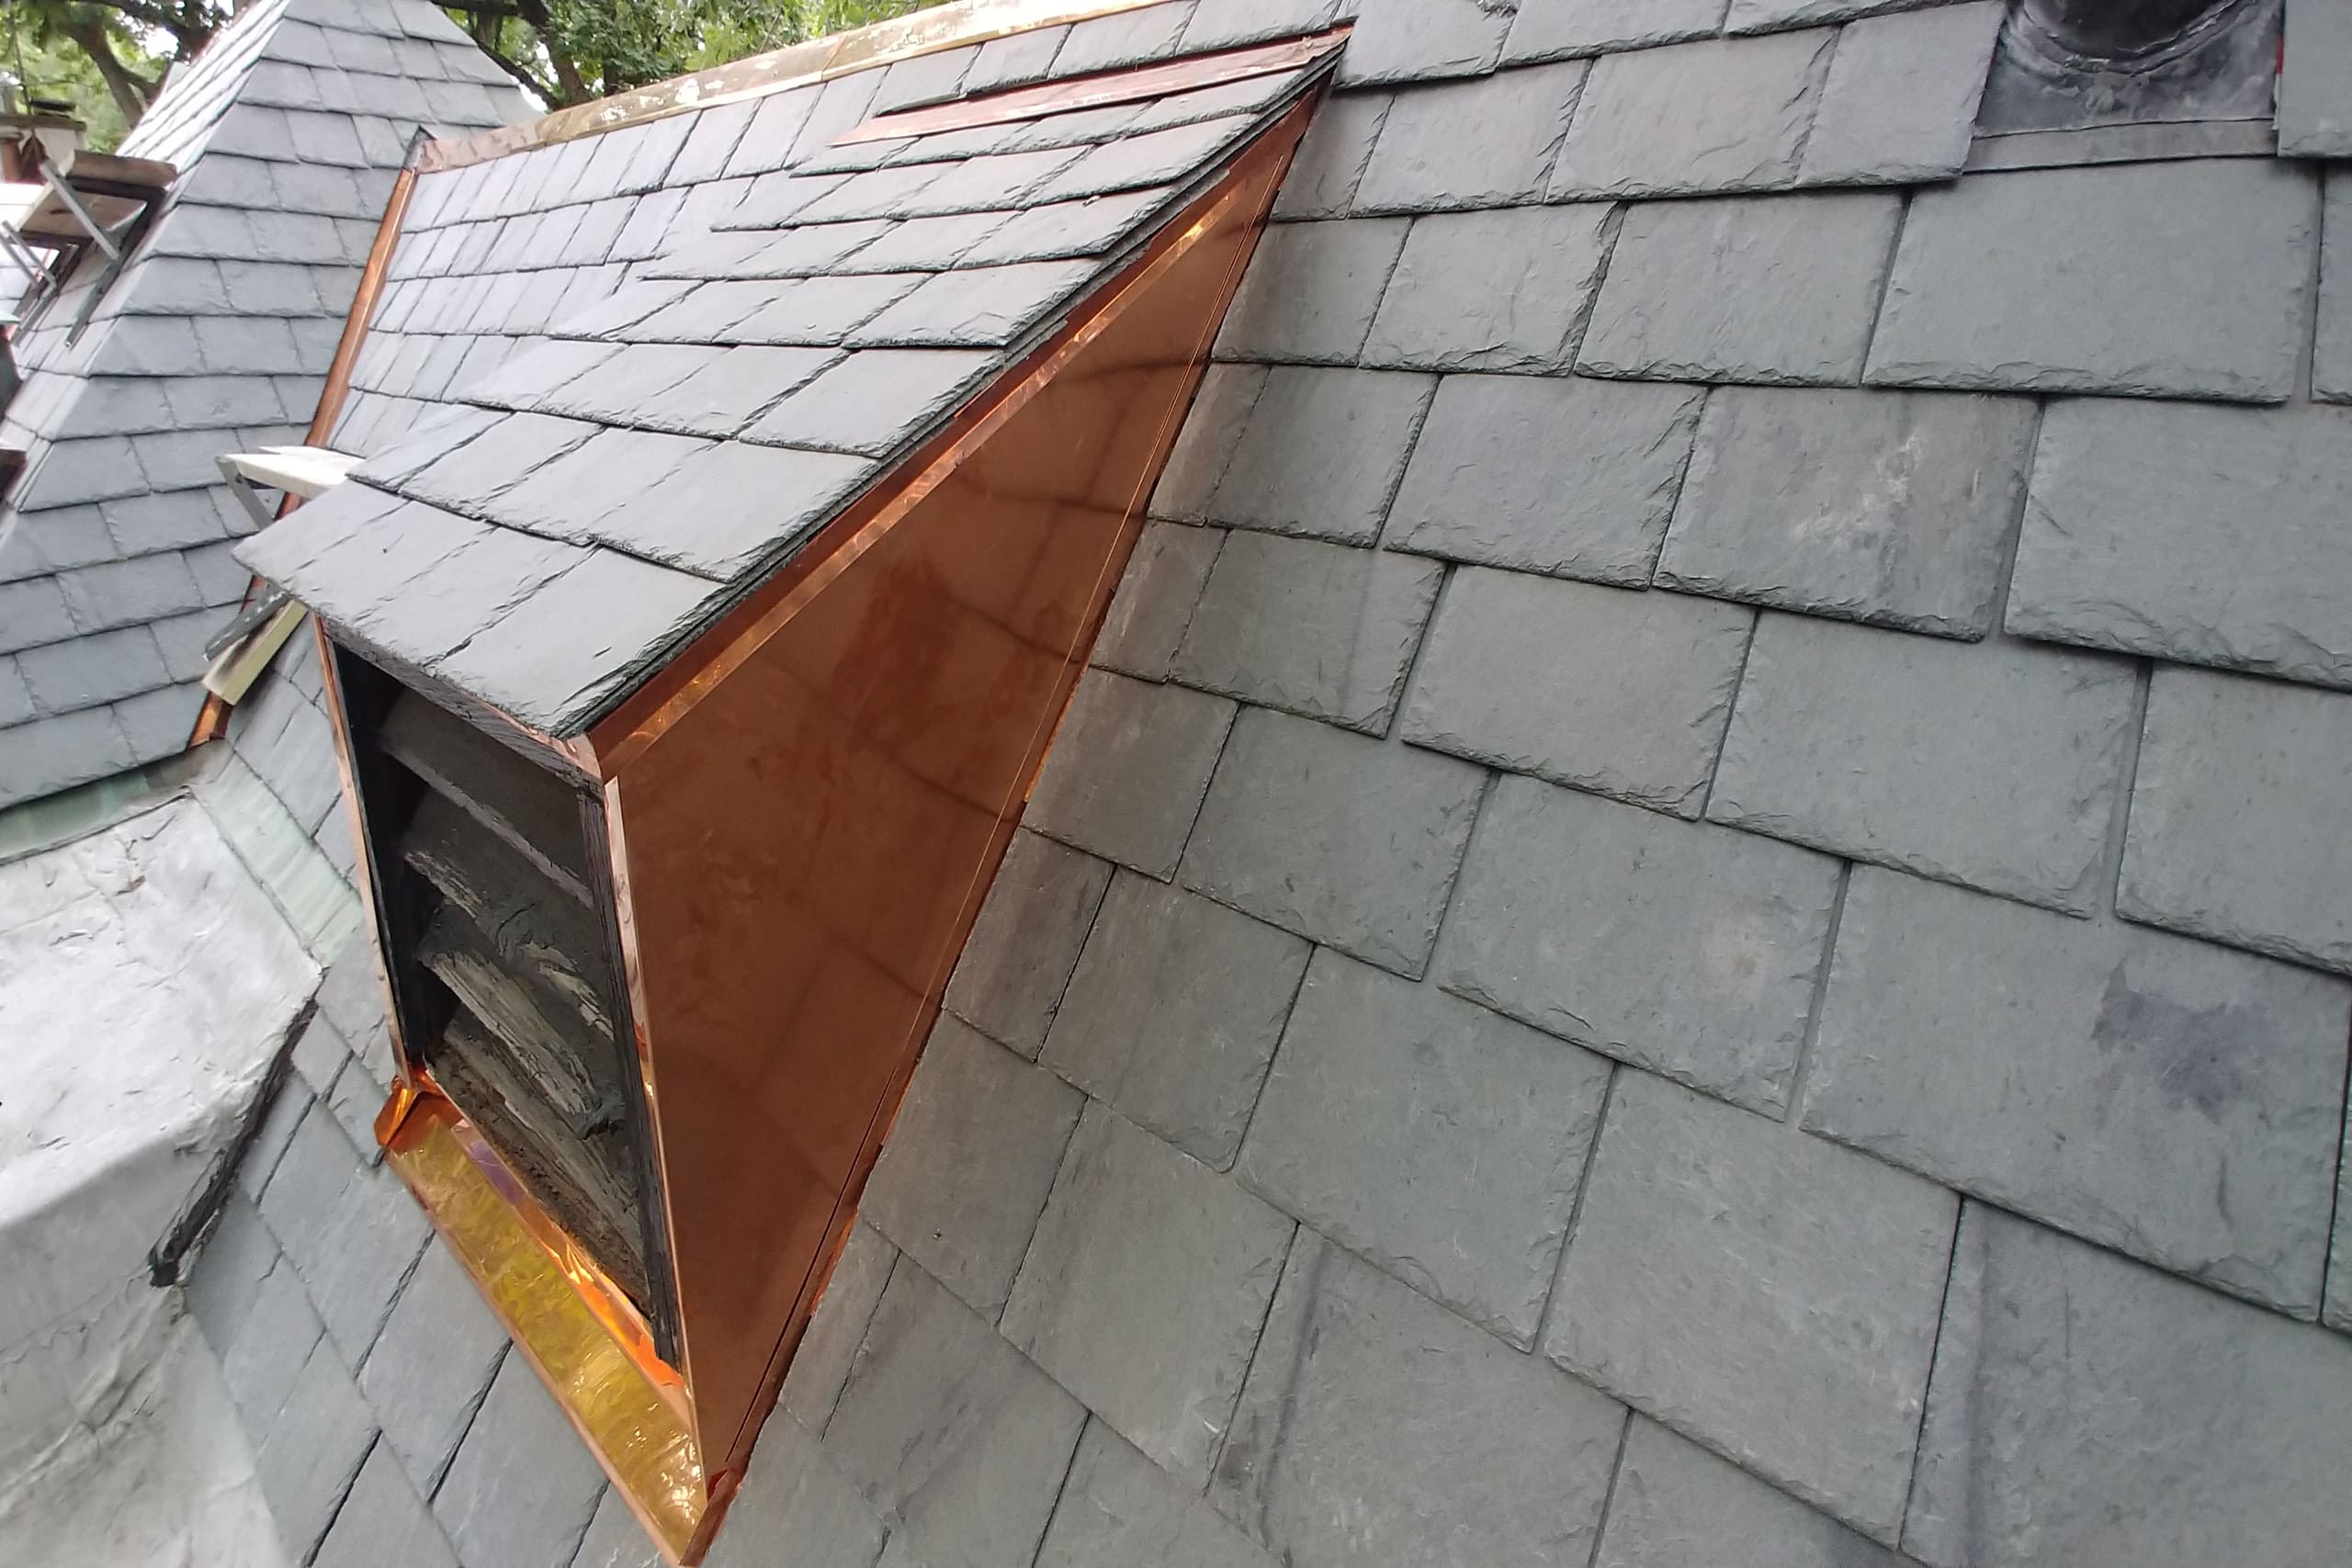 climax stil gijzelaar Slate Roof Replacement in Evanston | Smart Roofing Contractor Repair,  Installation, Storm Hail Damage, Chicago, Arlington Heights serving  Northwest Suburbs